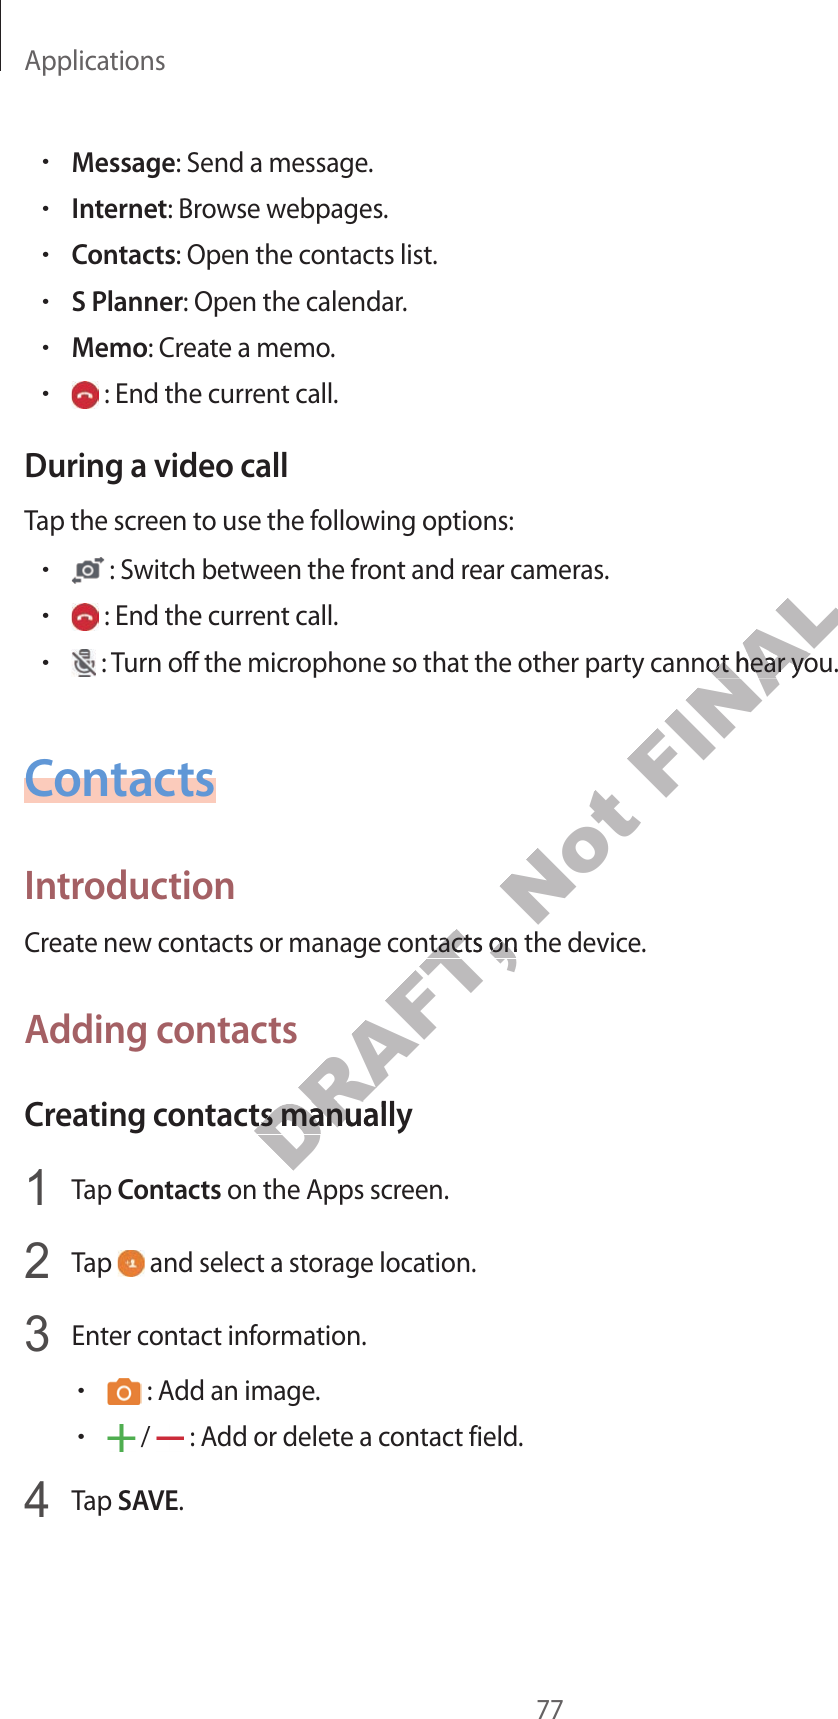 Applications77•Message: Send a message.•Internet: Browse webpages.•Contacts: Open the contacts list.•S Planner: Open the calendar.•Memo: Create a memo.• : End the current call.During a video callTap the screen to use the following options:• : Switch between the front and rear cameras.• : End the current call.• : Turn off the microphone so that the other party cannot hear you.ContactsIntroductionCreate new contacts or manage contacts on the device.Adding contactsCreating contacts manually1  Tap Contacts on the Apps screen.2  Tap   and select a storage location.3  Enter contact information.• : Add an image.• /   : Add or delete a contact field.4  Tap SAVE.DRAFT, ontacts on the devicontacts on the devictacts manuallytacts manually on the ANot FINALy cannot hear youy cannot hear you